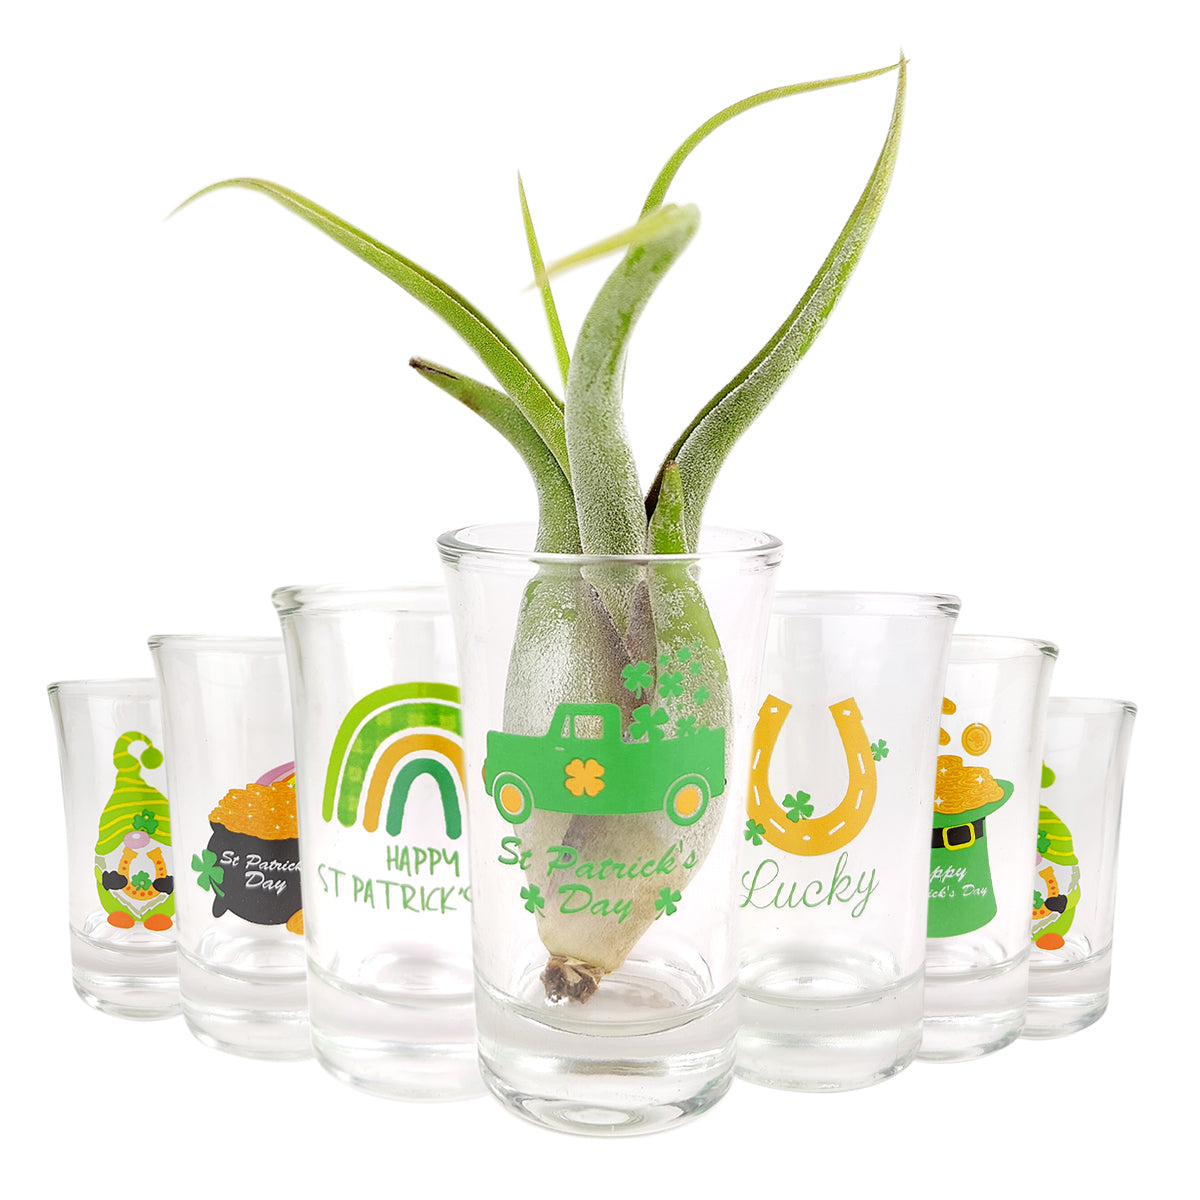 St. Patrick's Day Airplant Holder, glass air plant holder, mini airplant holder